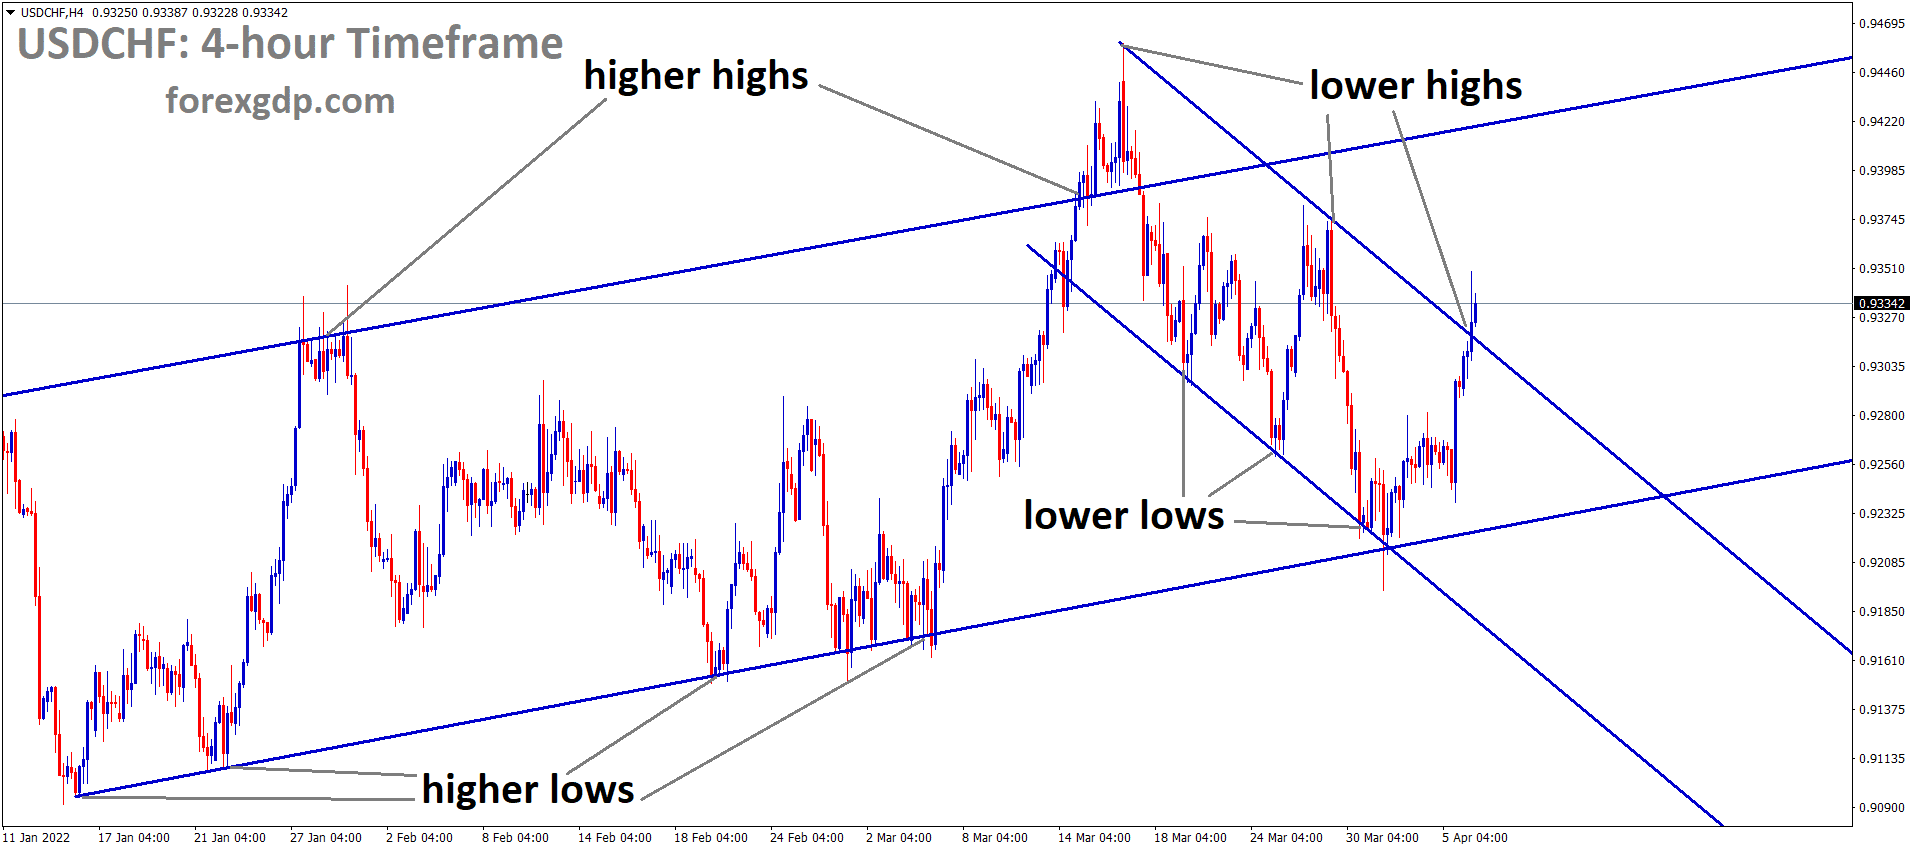 USDCHF H4 Time Frame Market is moving in an Ascending channel and Market has reached the Lower high area of the Minor Descending channel under Major Ascending channel.